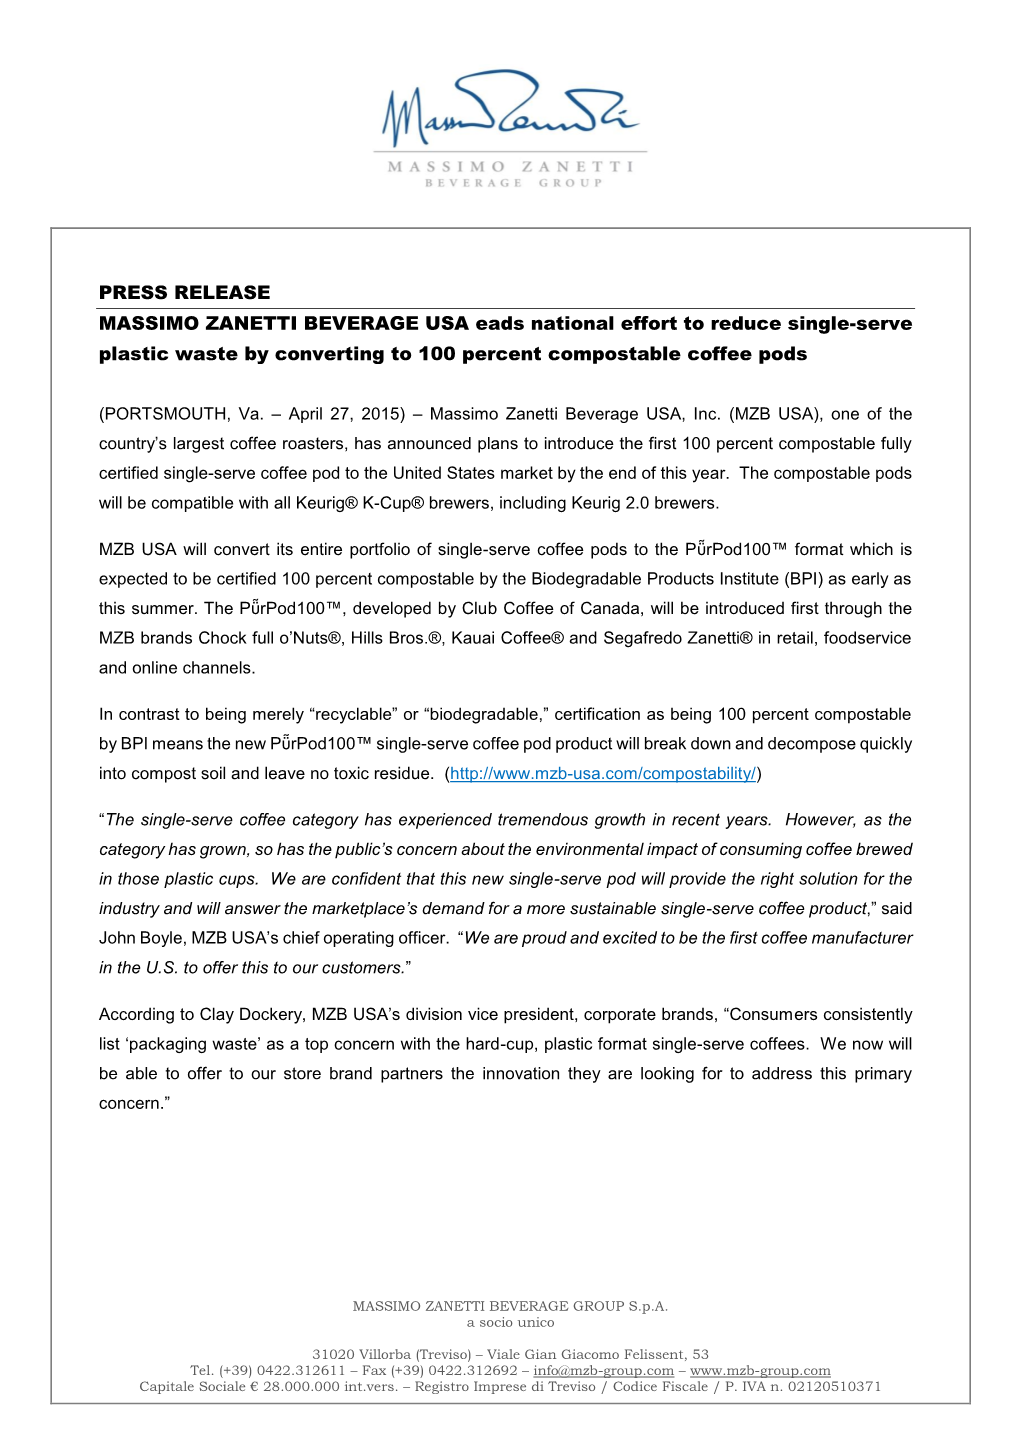 PRESS RELEASE MASSIMO ZANETTI BEVERAGE USA Eads National Effort to Reduce Single-Serve Plastic Waste by Converting to 100 Percent Compostable Coffee Pods